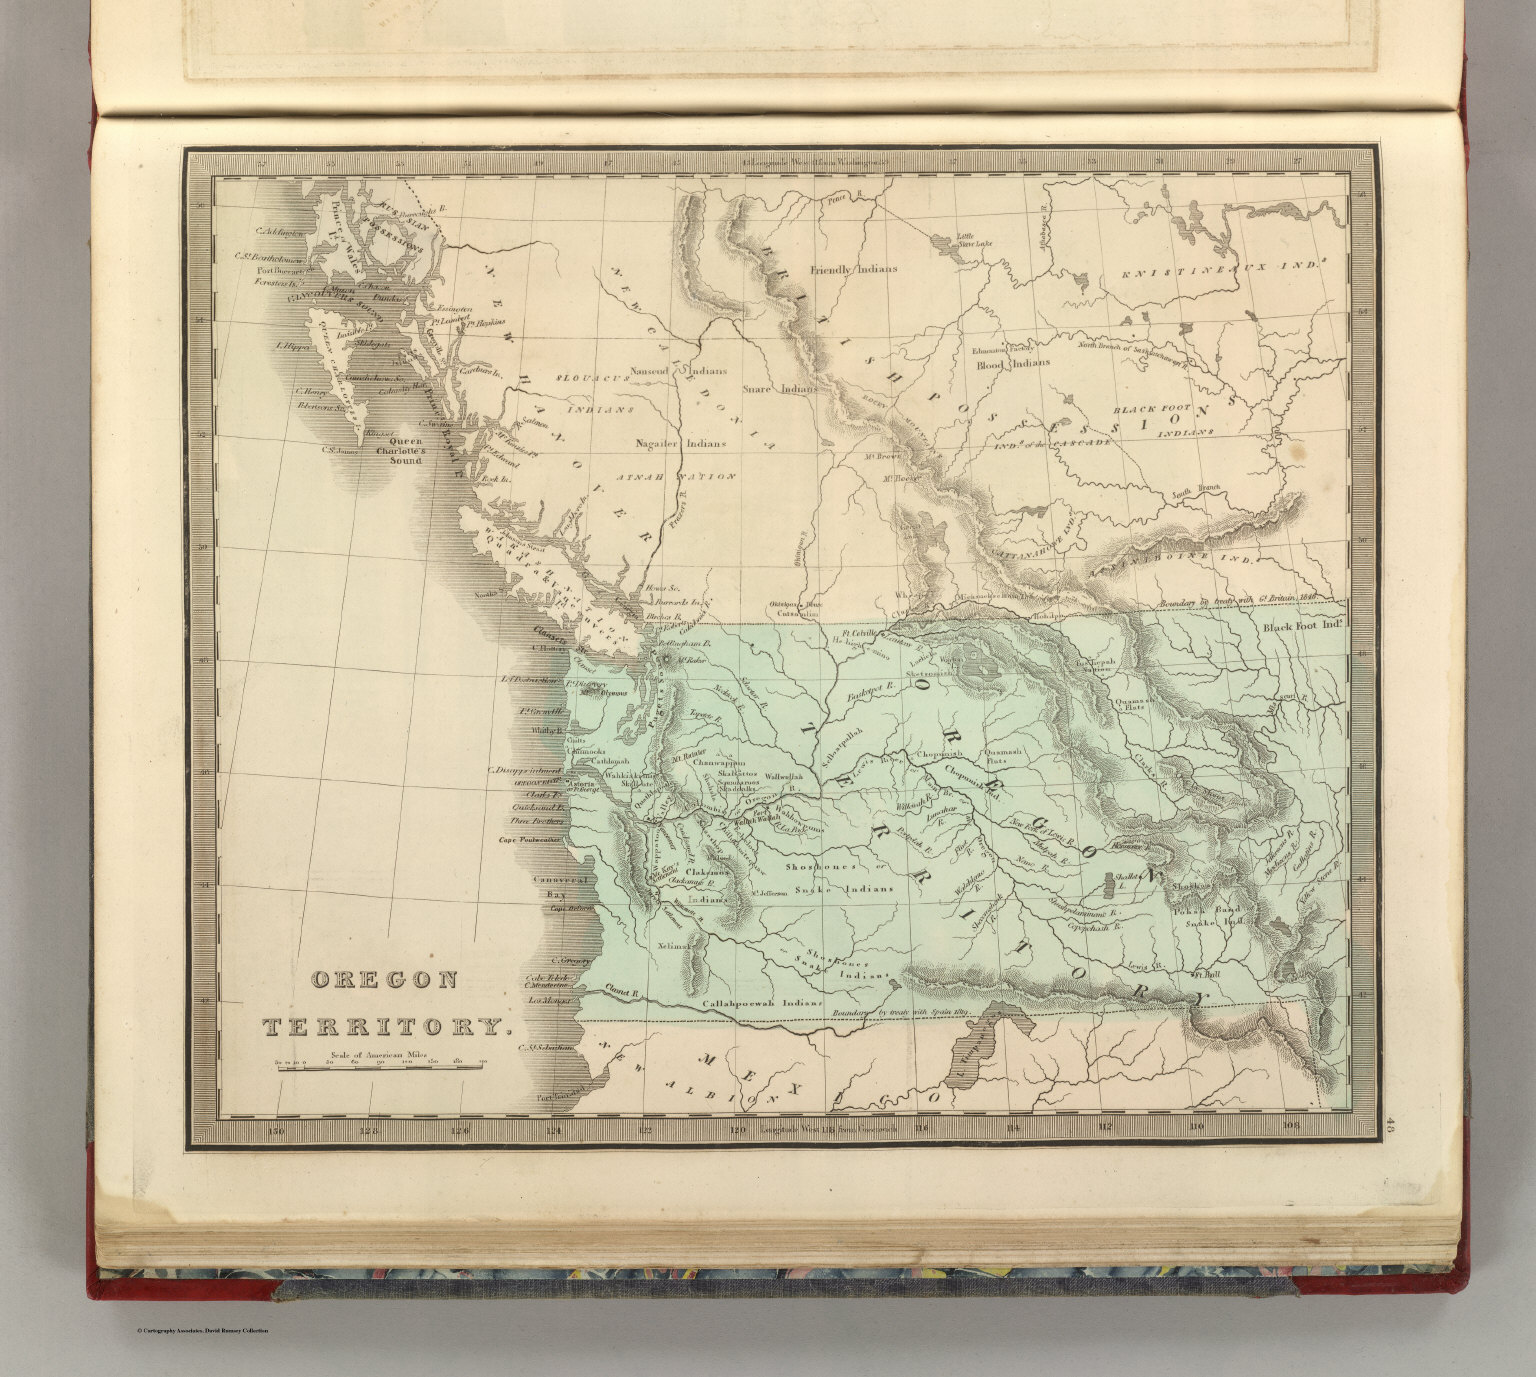 Oregon Territory David Rumsey Historical Map Collection 2308